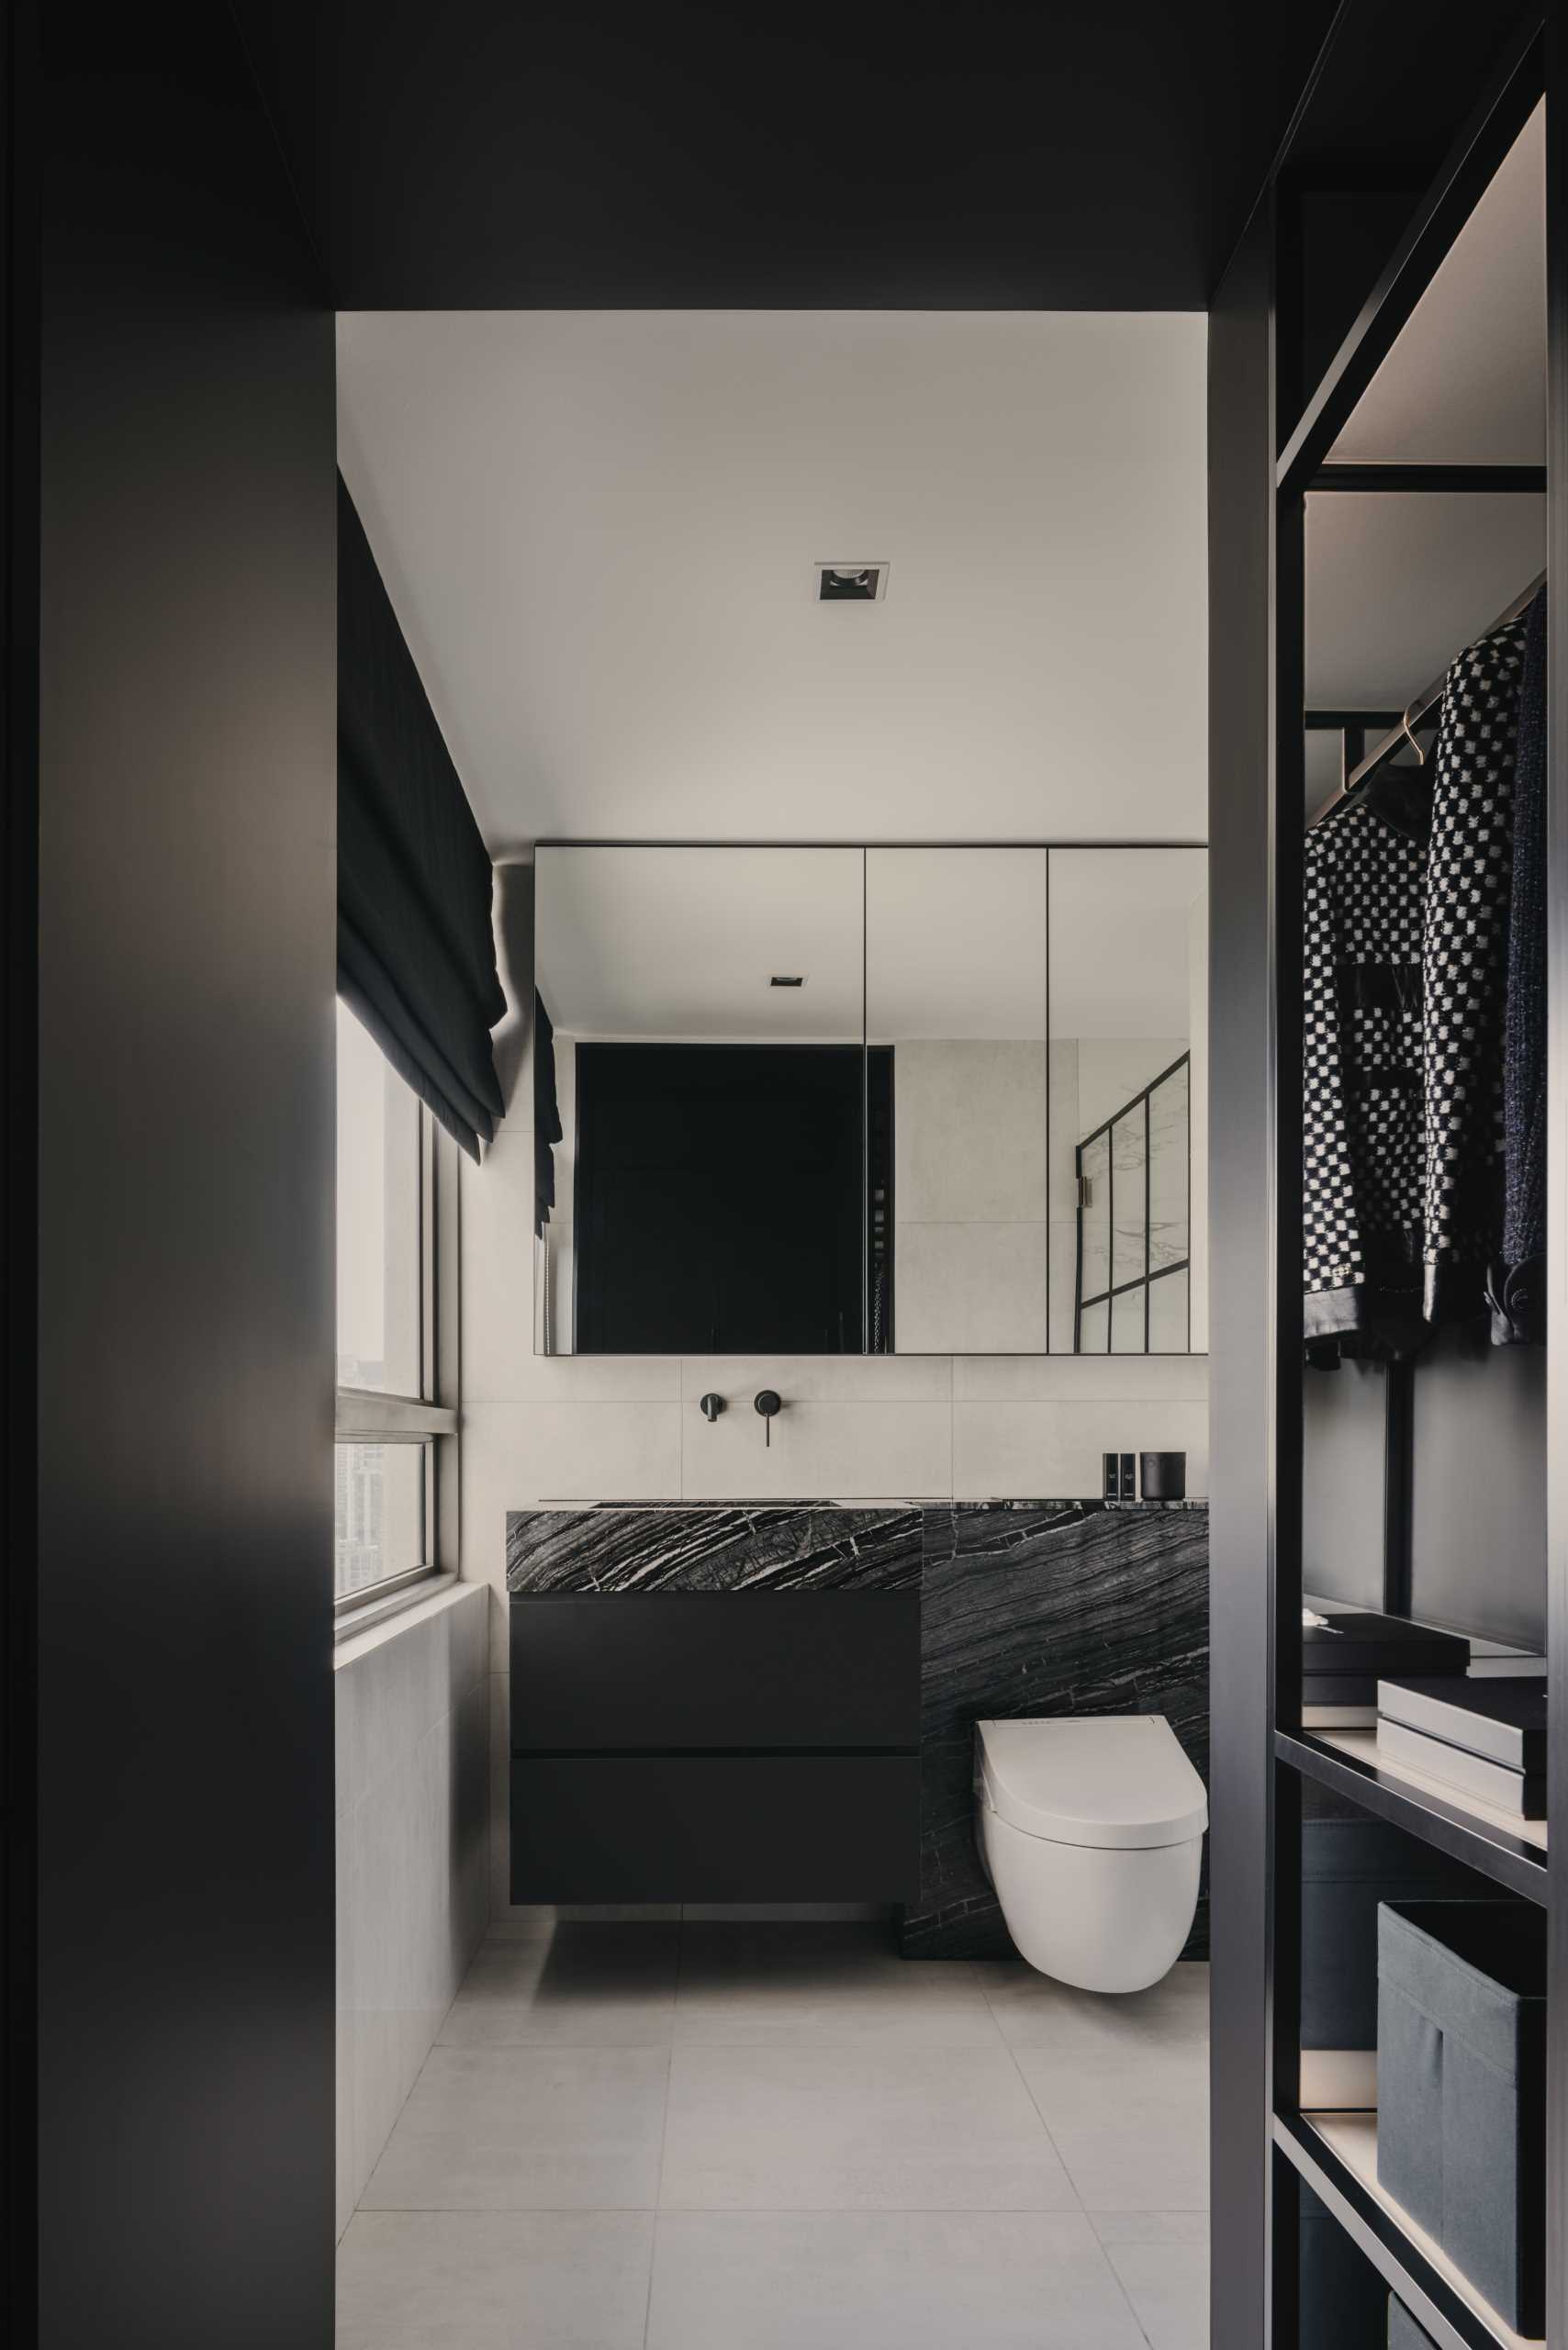 A modern bathroom with a monochrome theme, includes a black vanity, a stone countertop, and a s،wer with black accents.